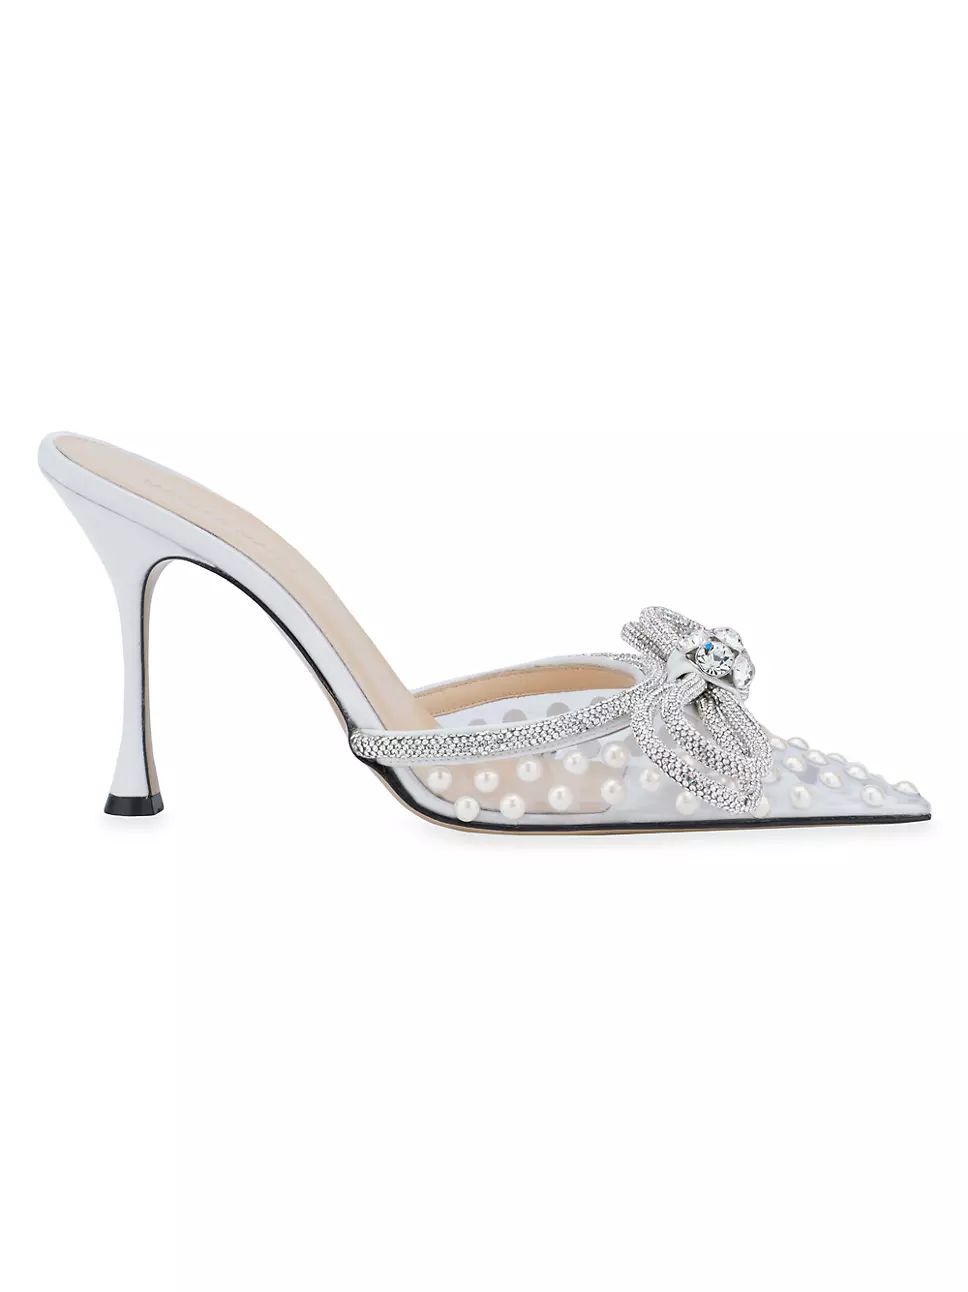 Mach & Mach Double Bow Faux Pearl-Embellished Mules | Saks Fifth Avenue